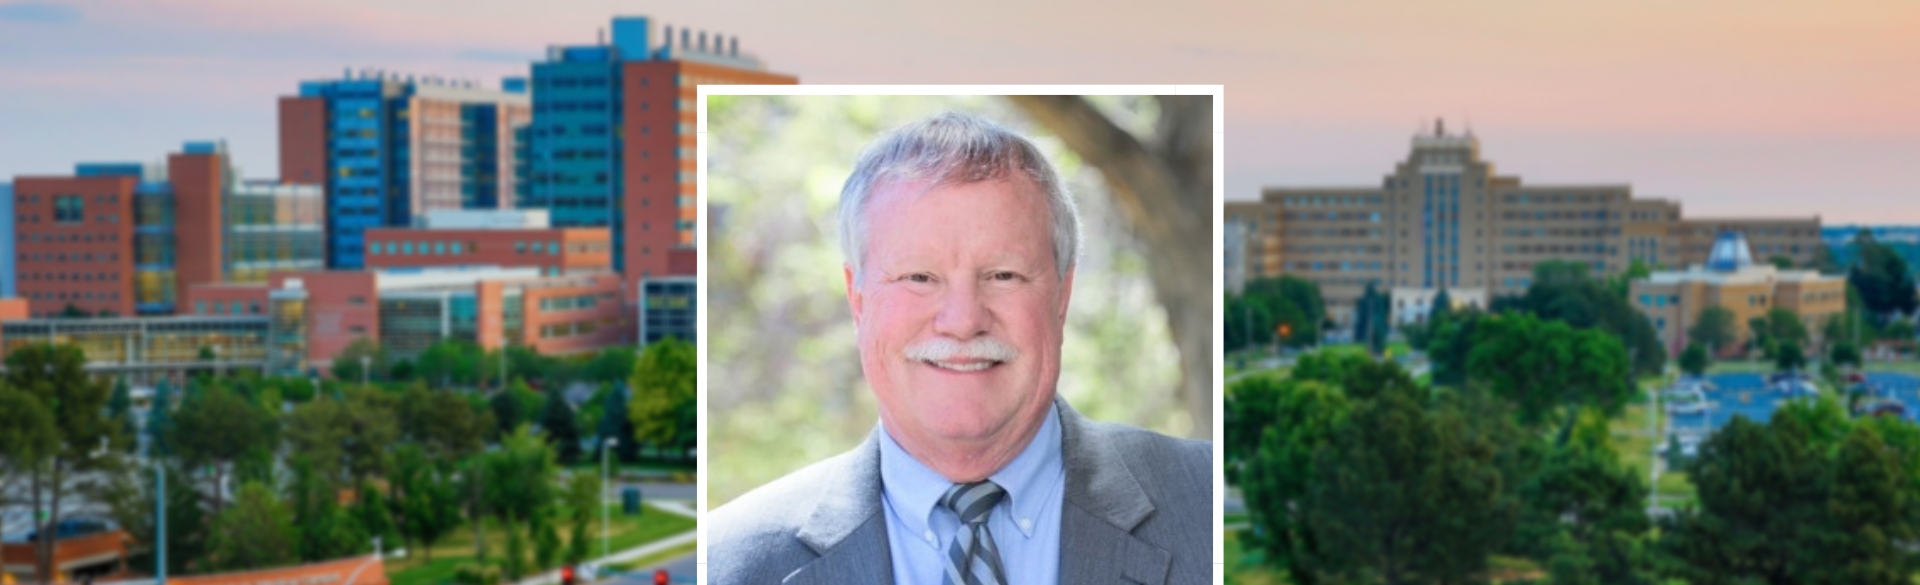 Man smiling in headshot wearing grey suit with blue shirt on a background of CU Anschutz Medical Campus